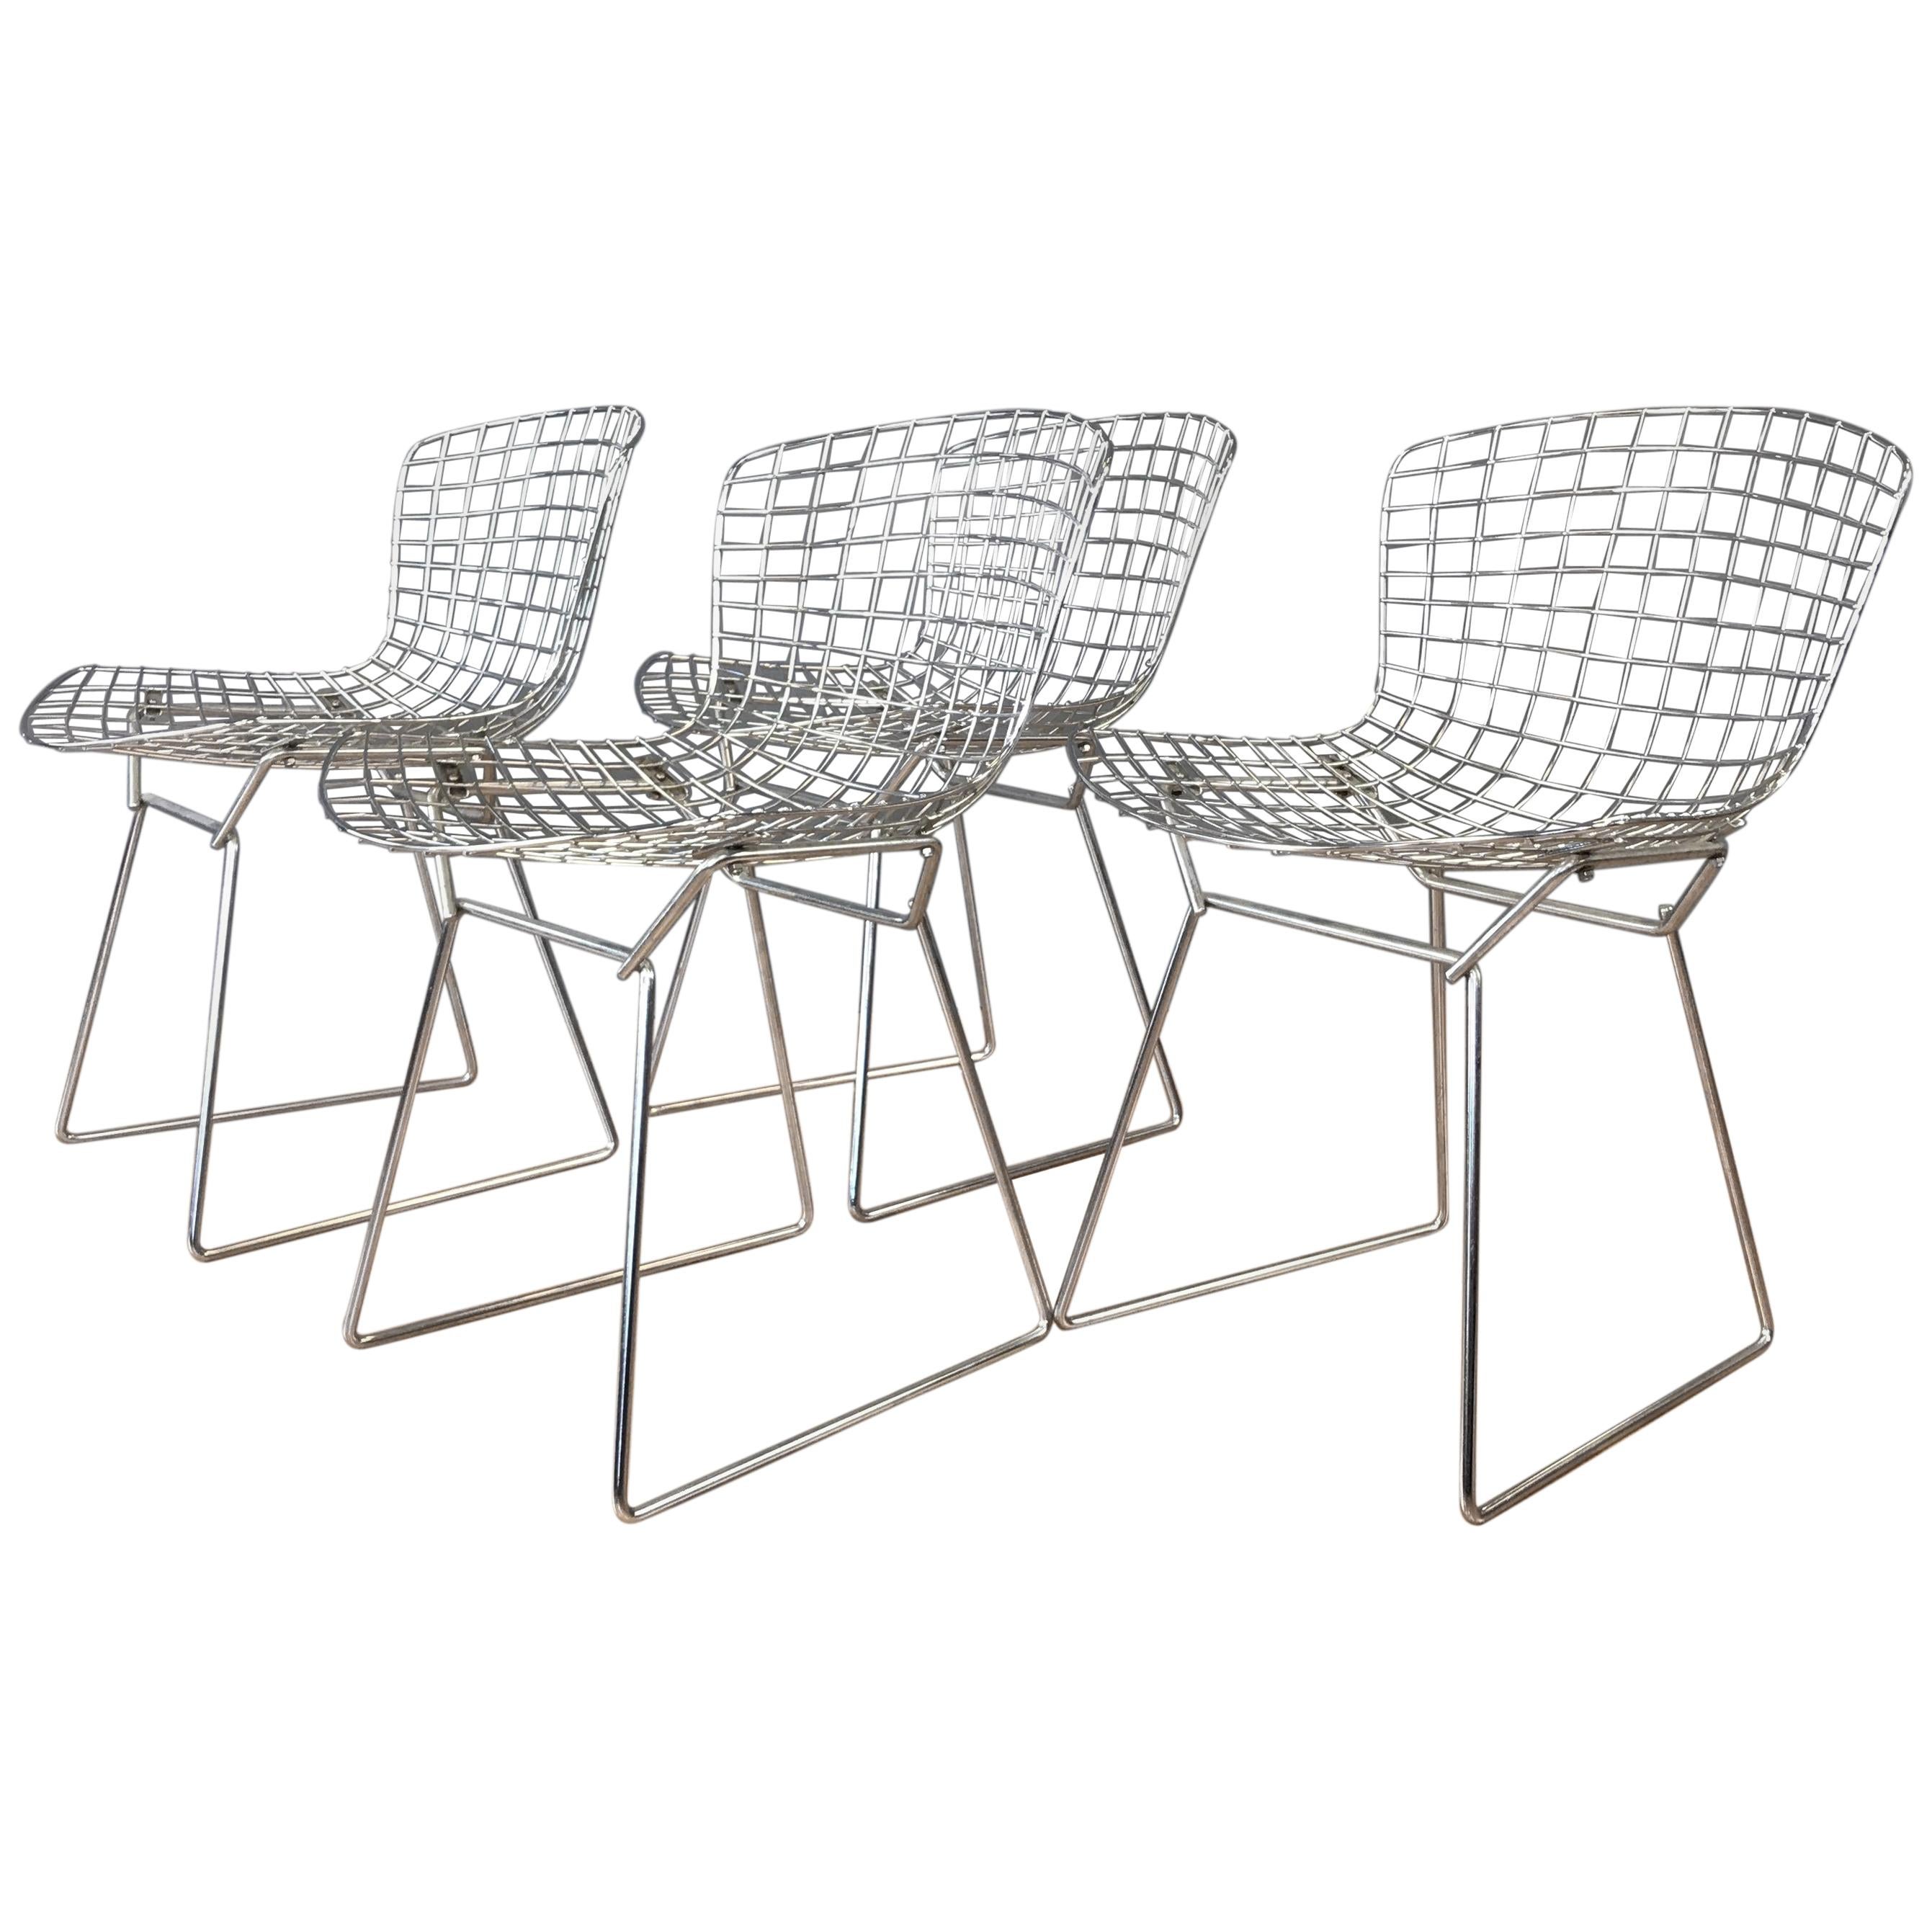 Four Bertoia Chrome Side Chairs for Knoll